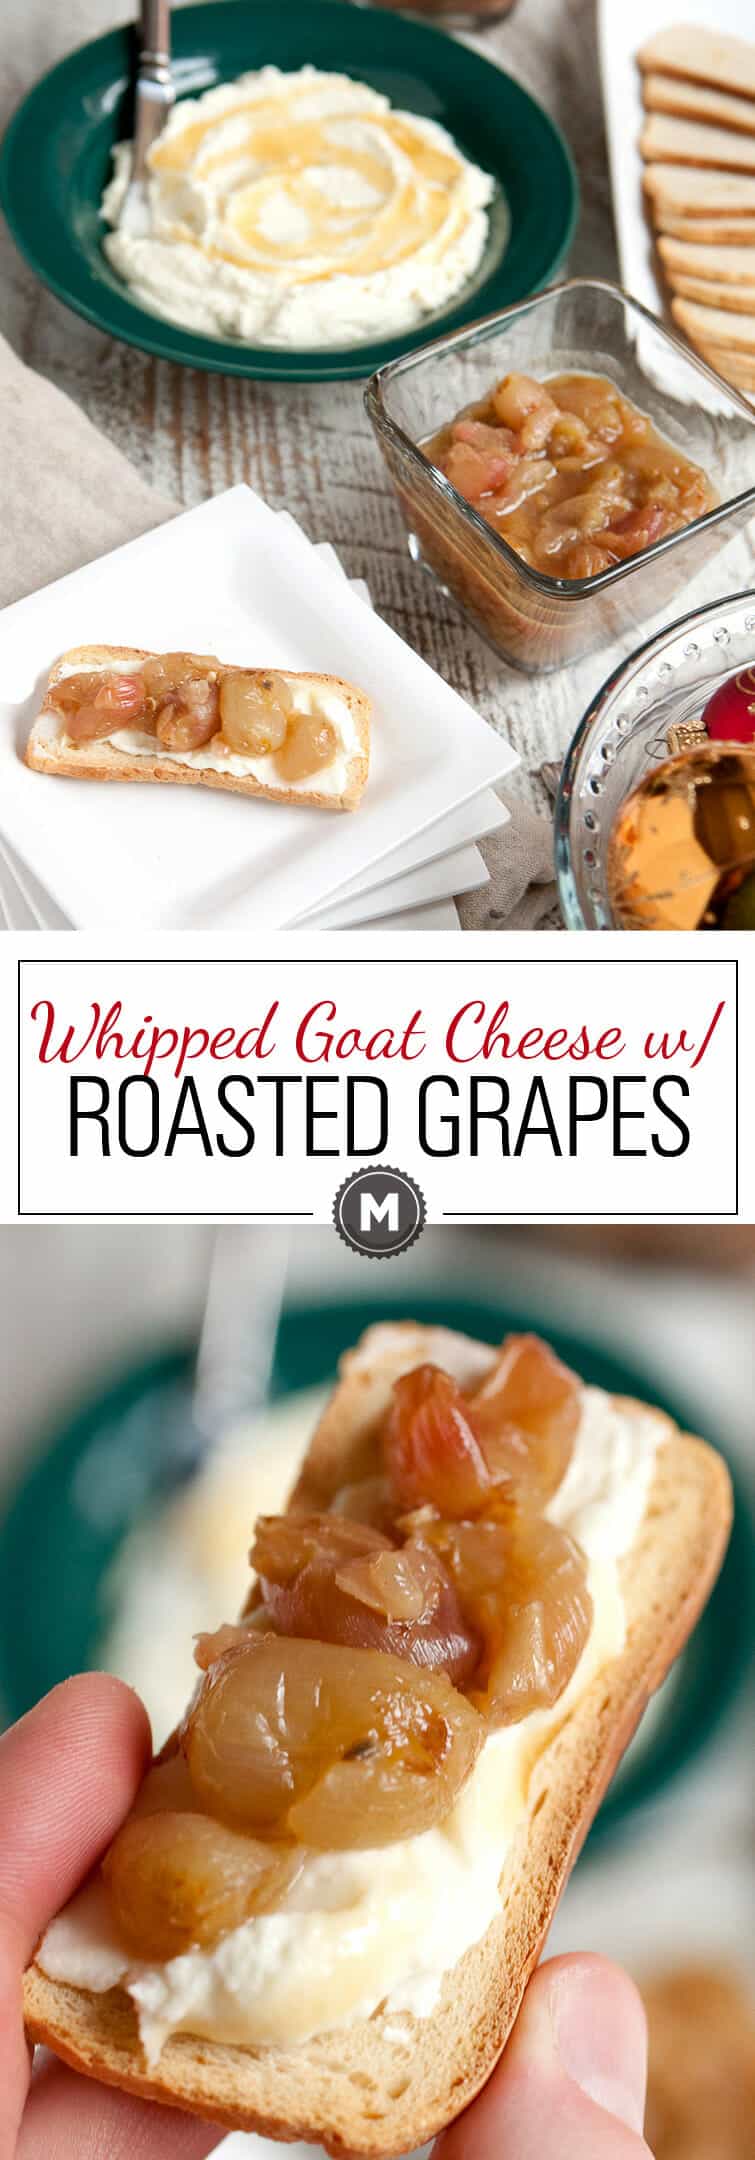 Roasted Grapes with Whipped Goat Cheese: This is such an EASY and decadent appetizer. It's almost cheating how amazing it is. Tangy goat cheese, whipped until light and fluffy, and served with slightly sweet and bursting roasted grapes. Put them out at every party you have this winter. | Macheesmo.com